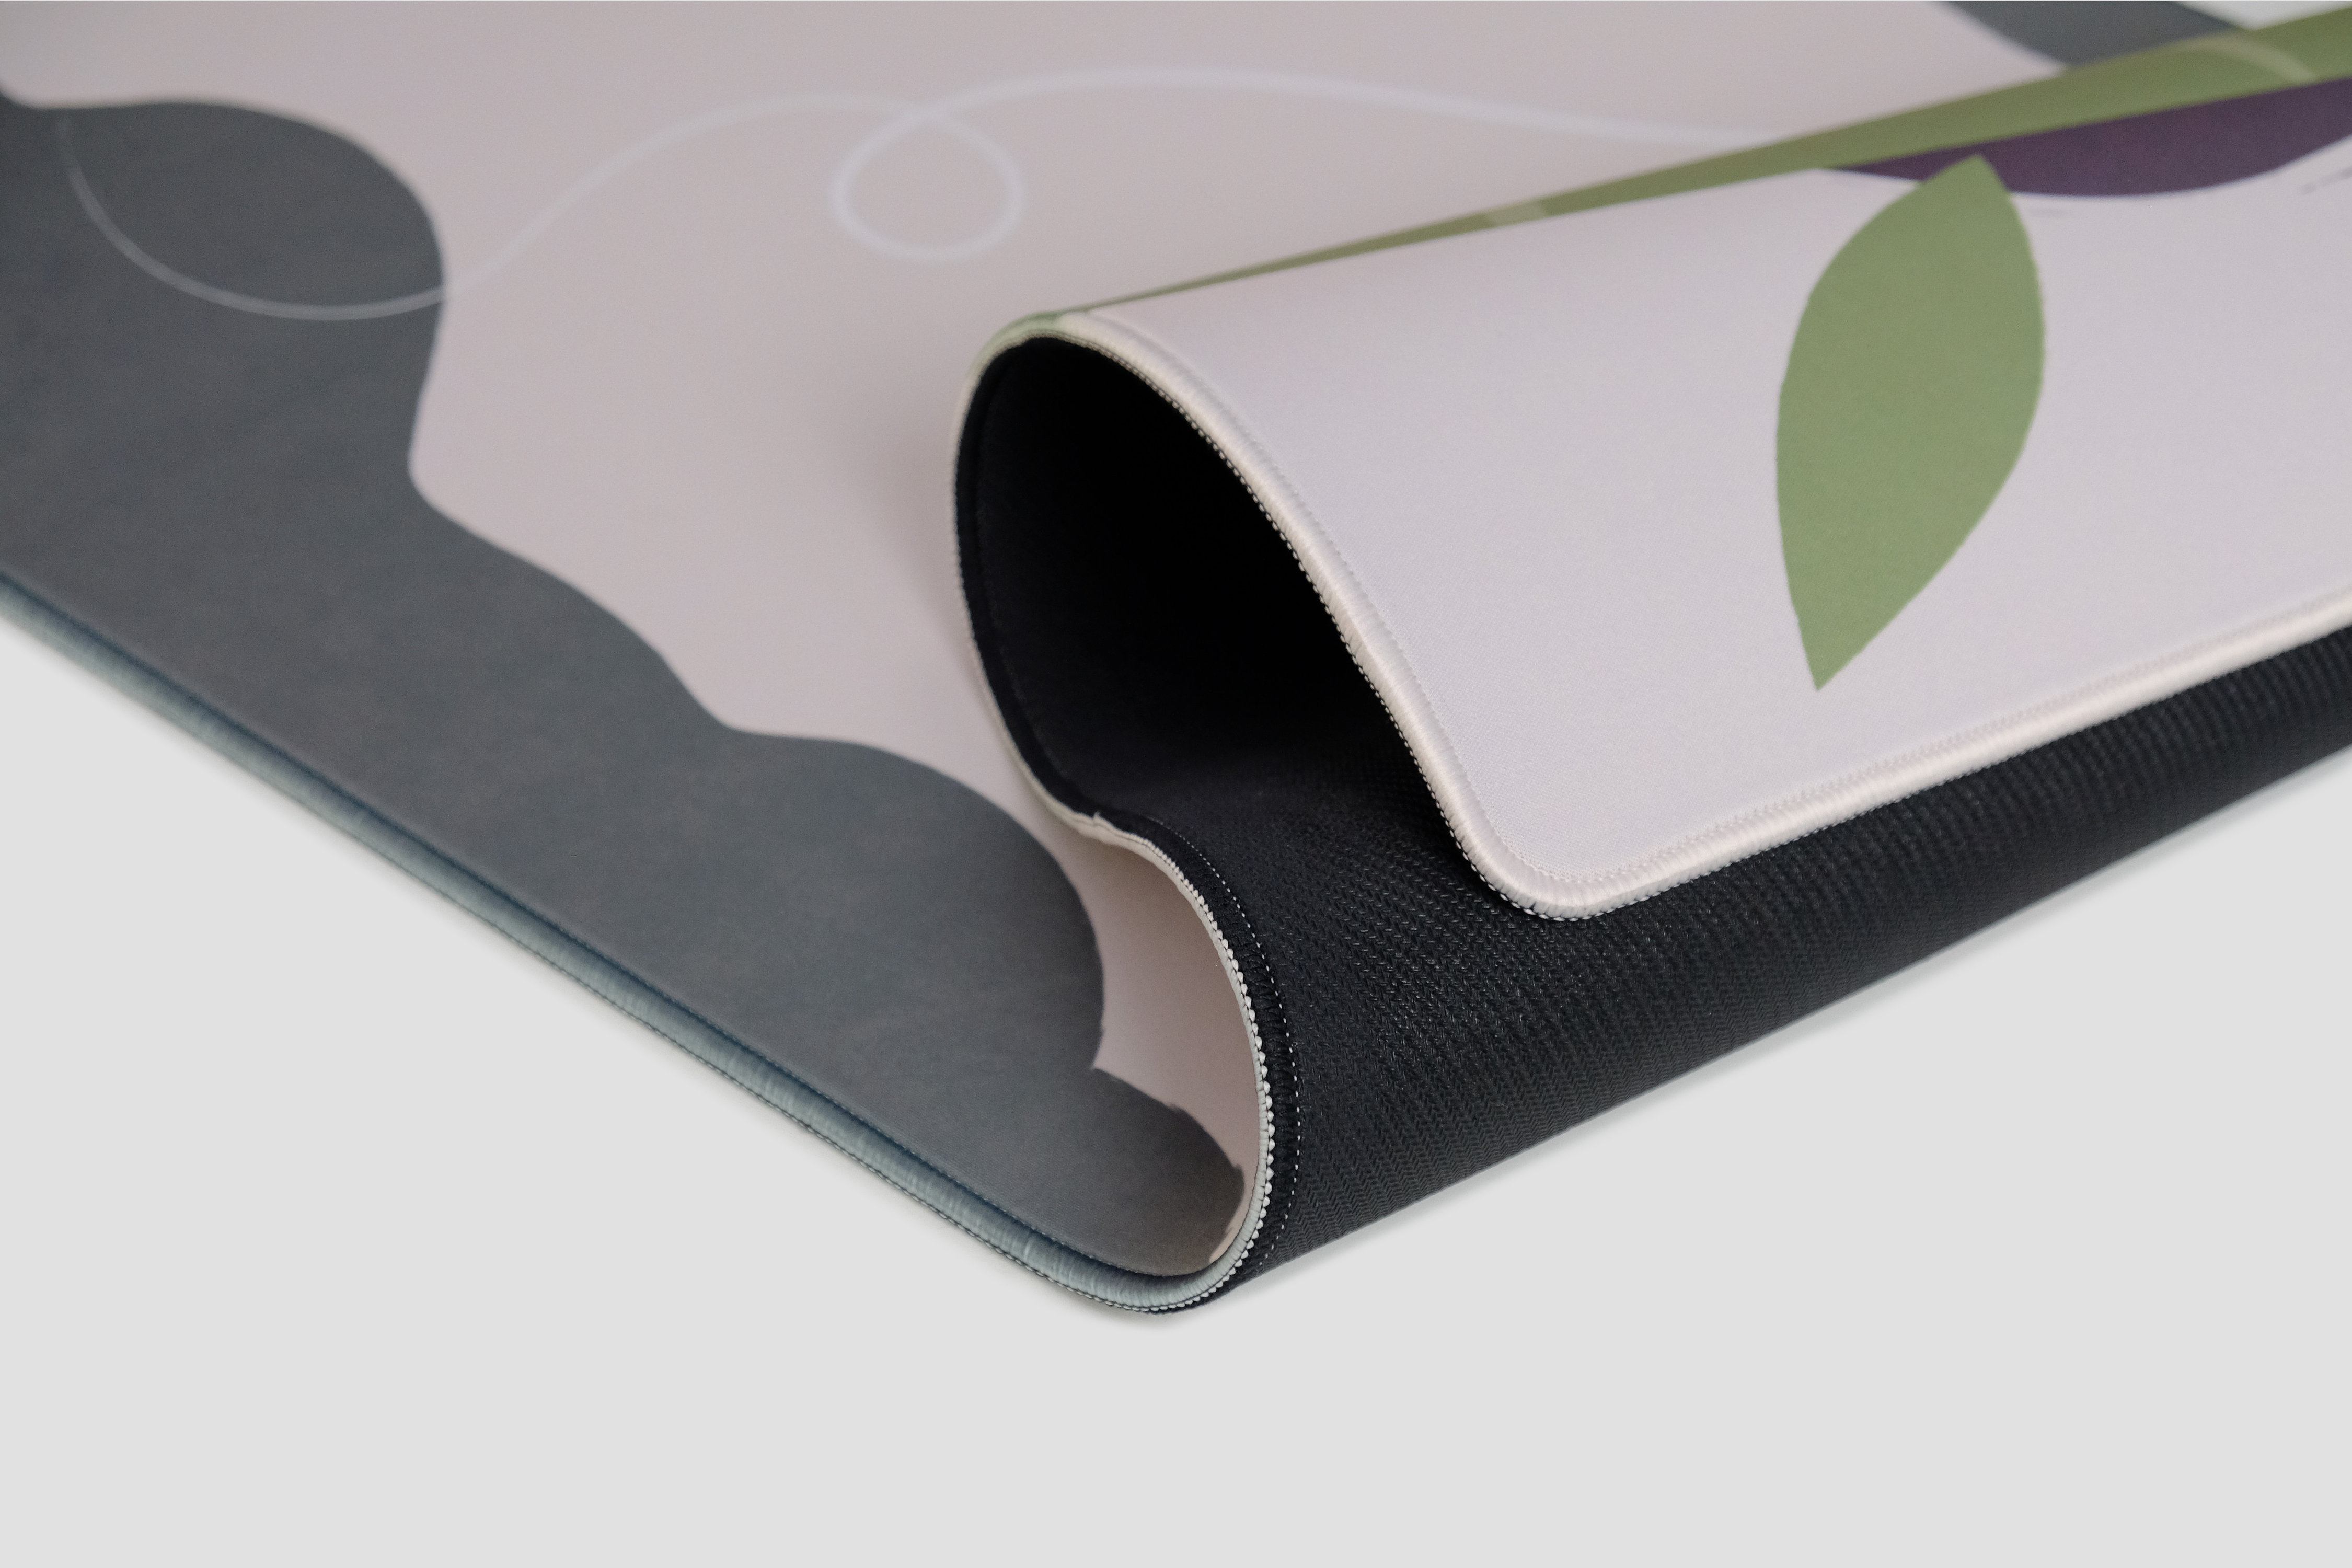 Folded view of the Zen Deskmat Bamboo by KFA.